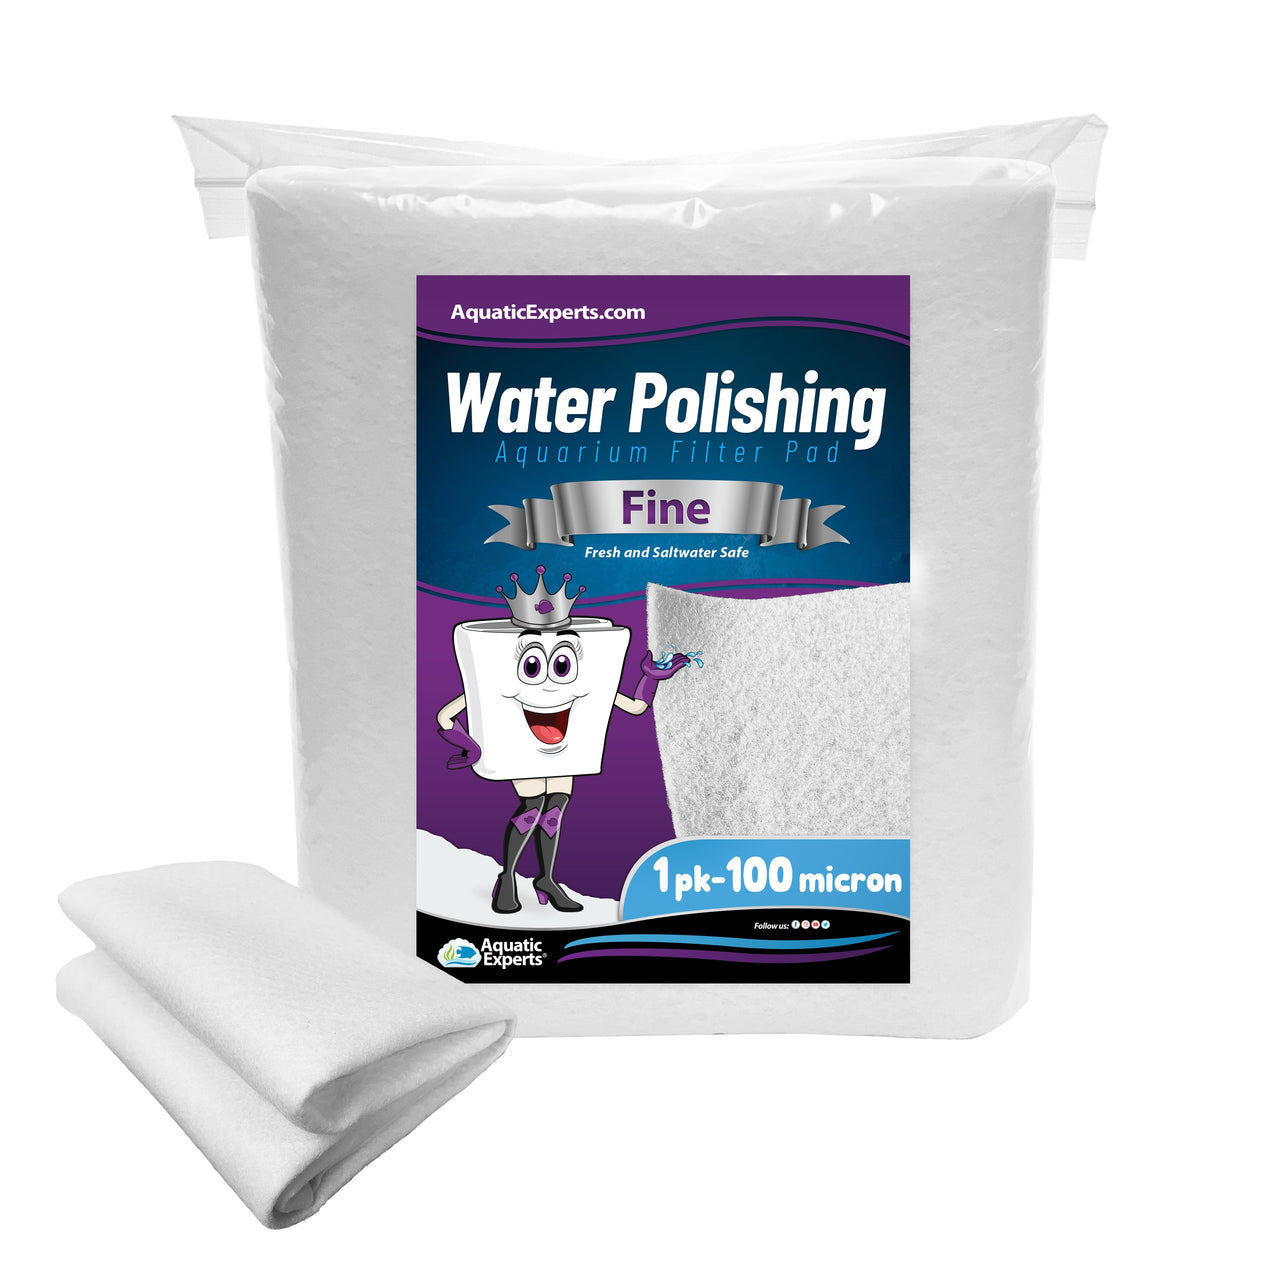 Polishing Filter Pad 100 Mi Prefilter Media - 24 in by 36 in by 1/8 in - 1 Pack Filter Pad Aquatic Experts 